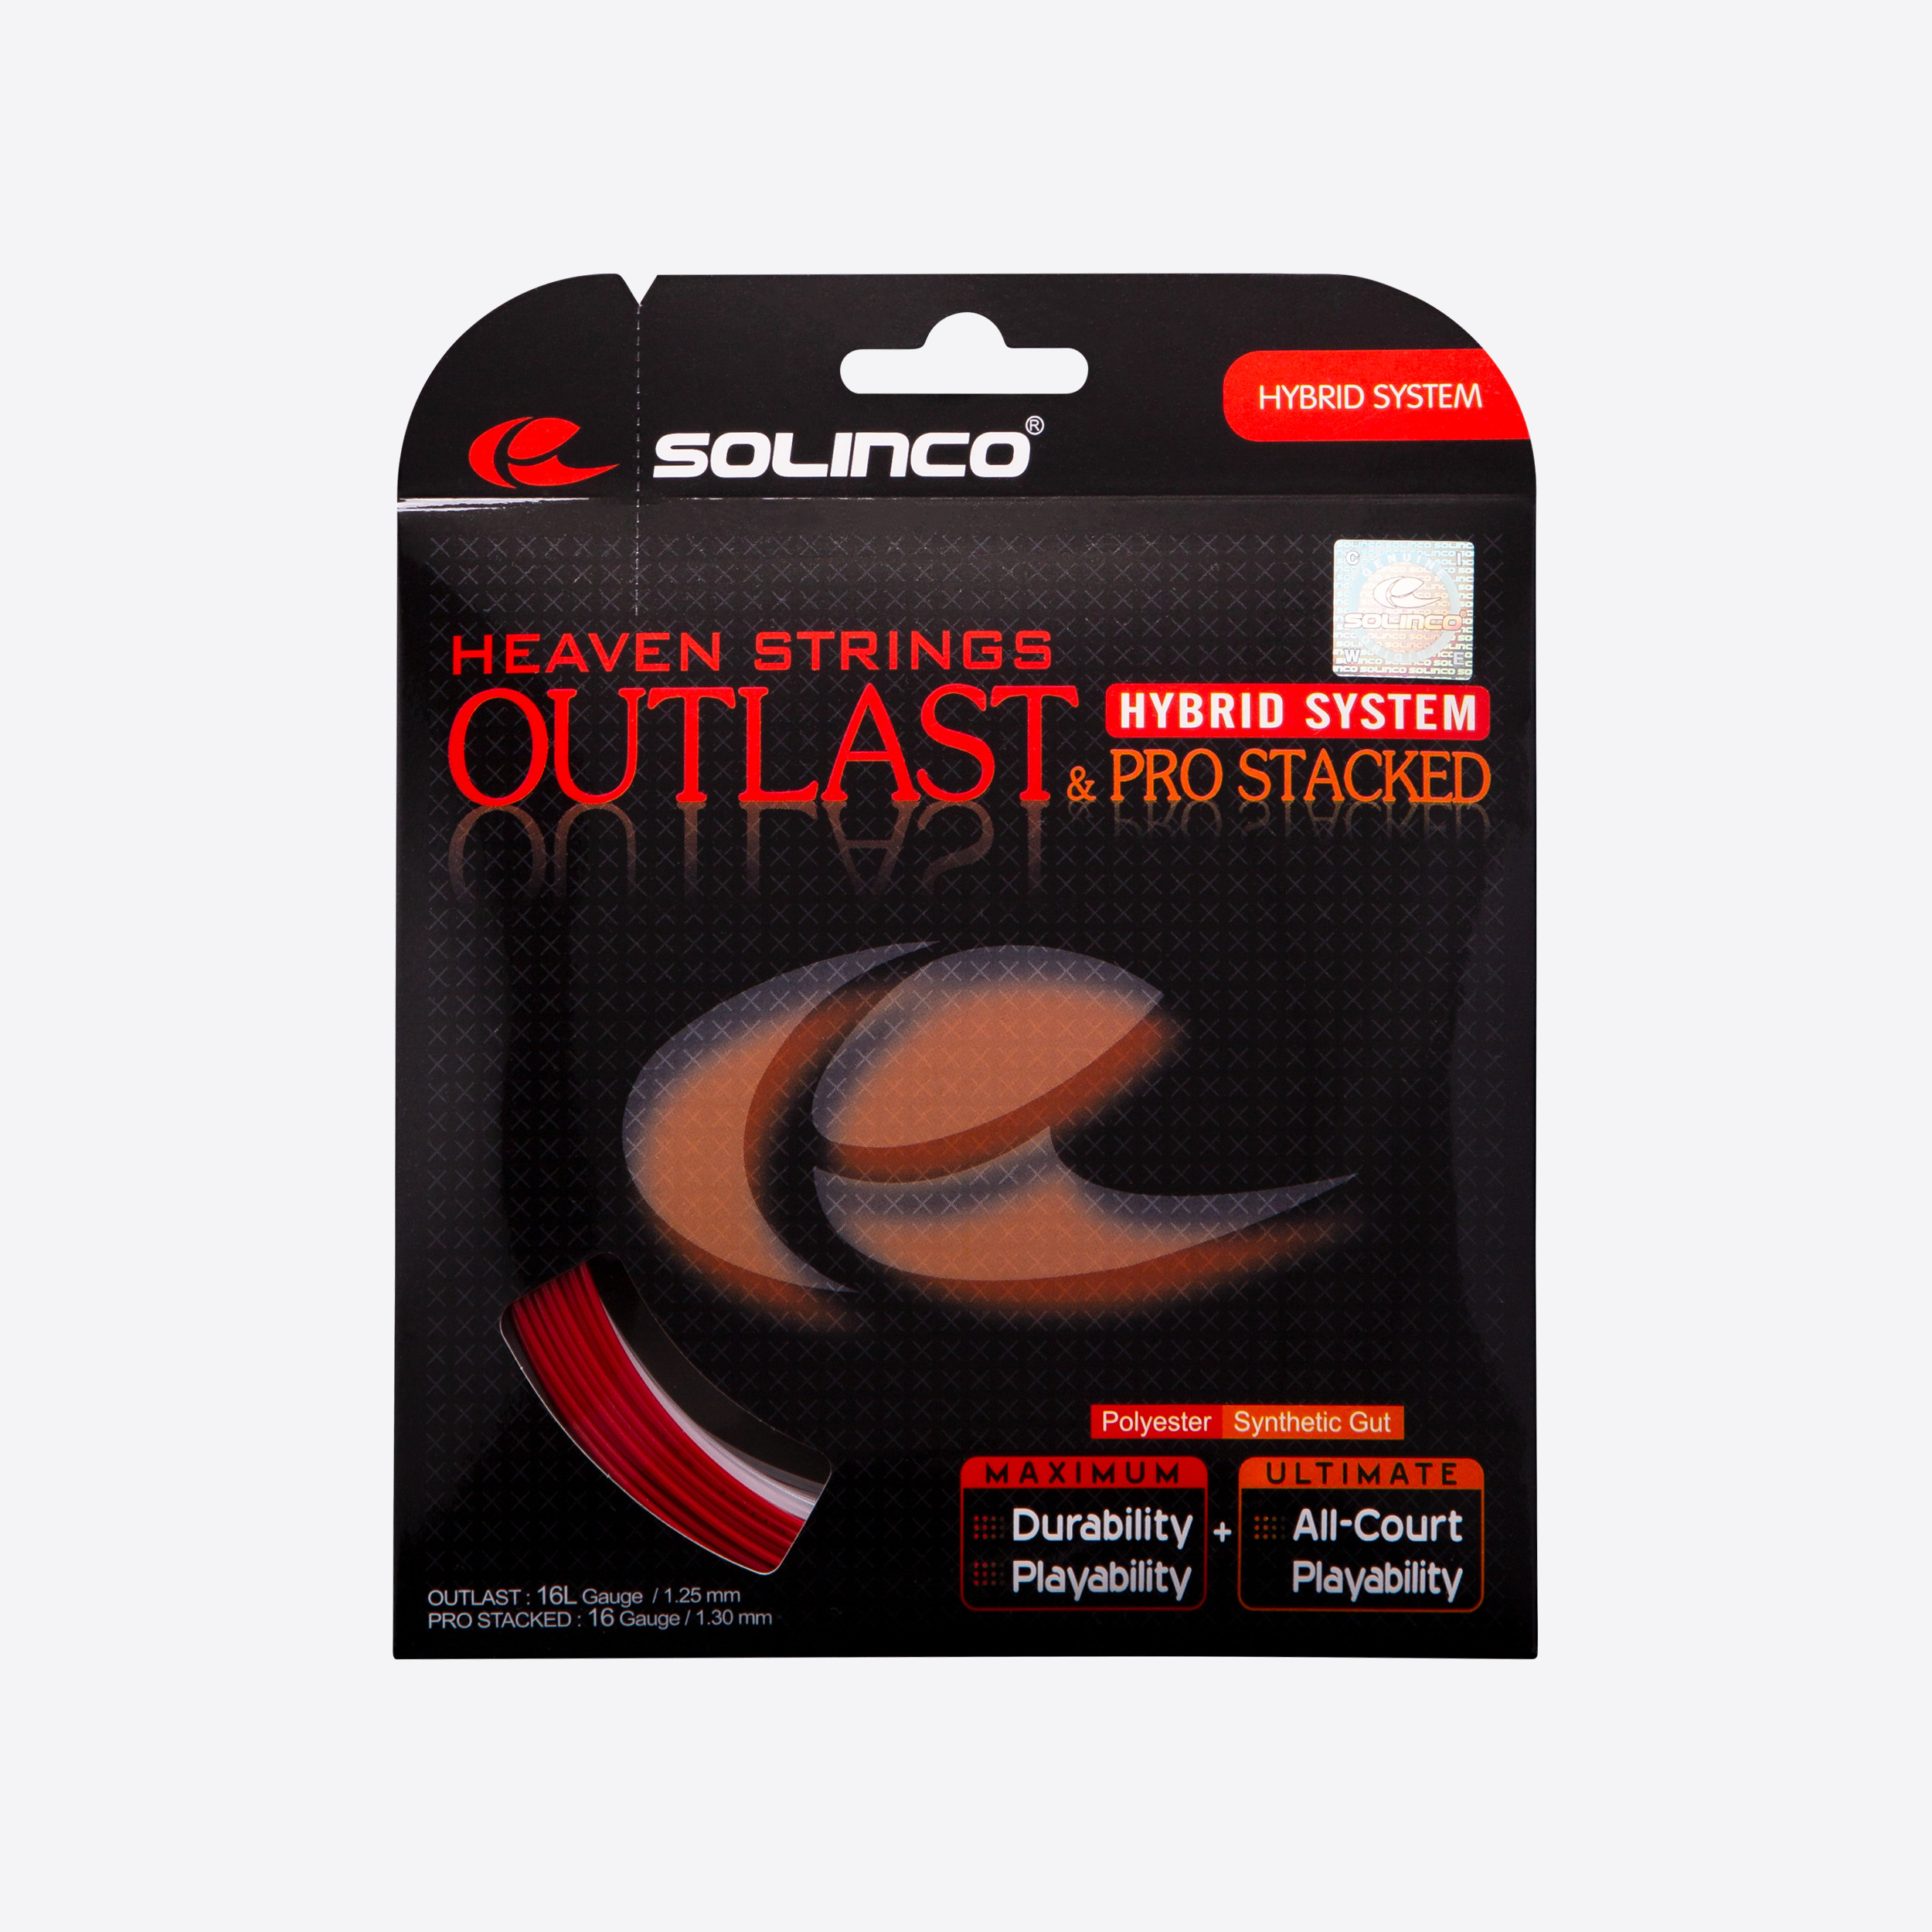 Outlast + Pro Stacked - SOLINCO® : PERFORMANCE ENGINEERED EQUIPMENT